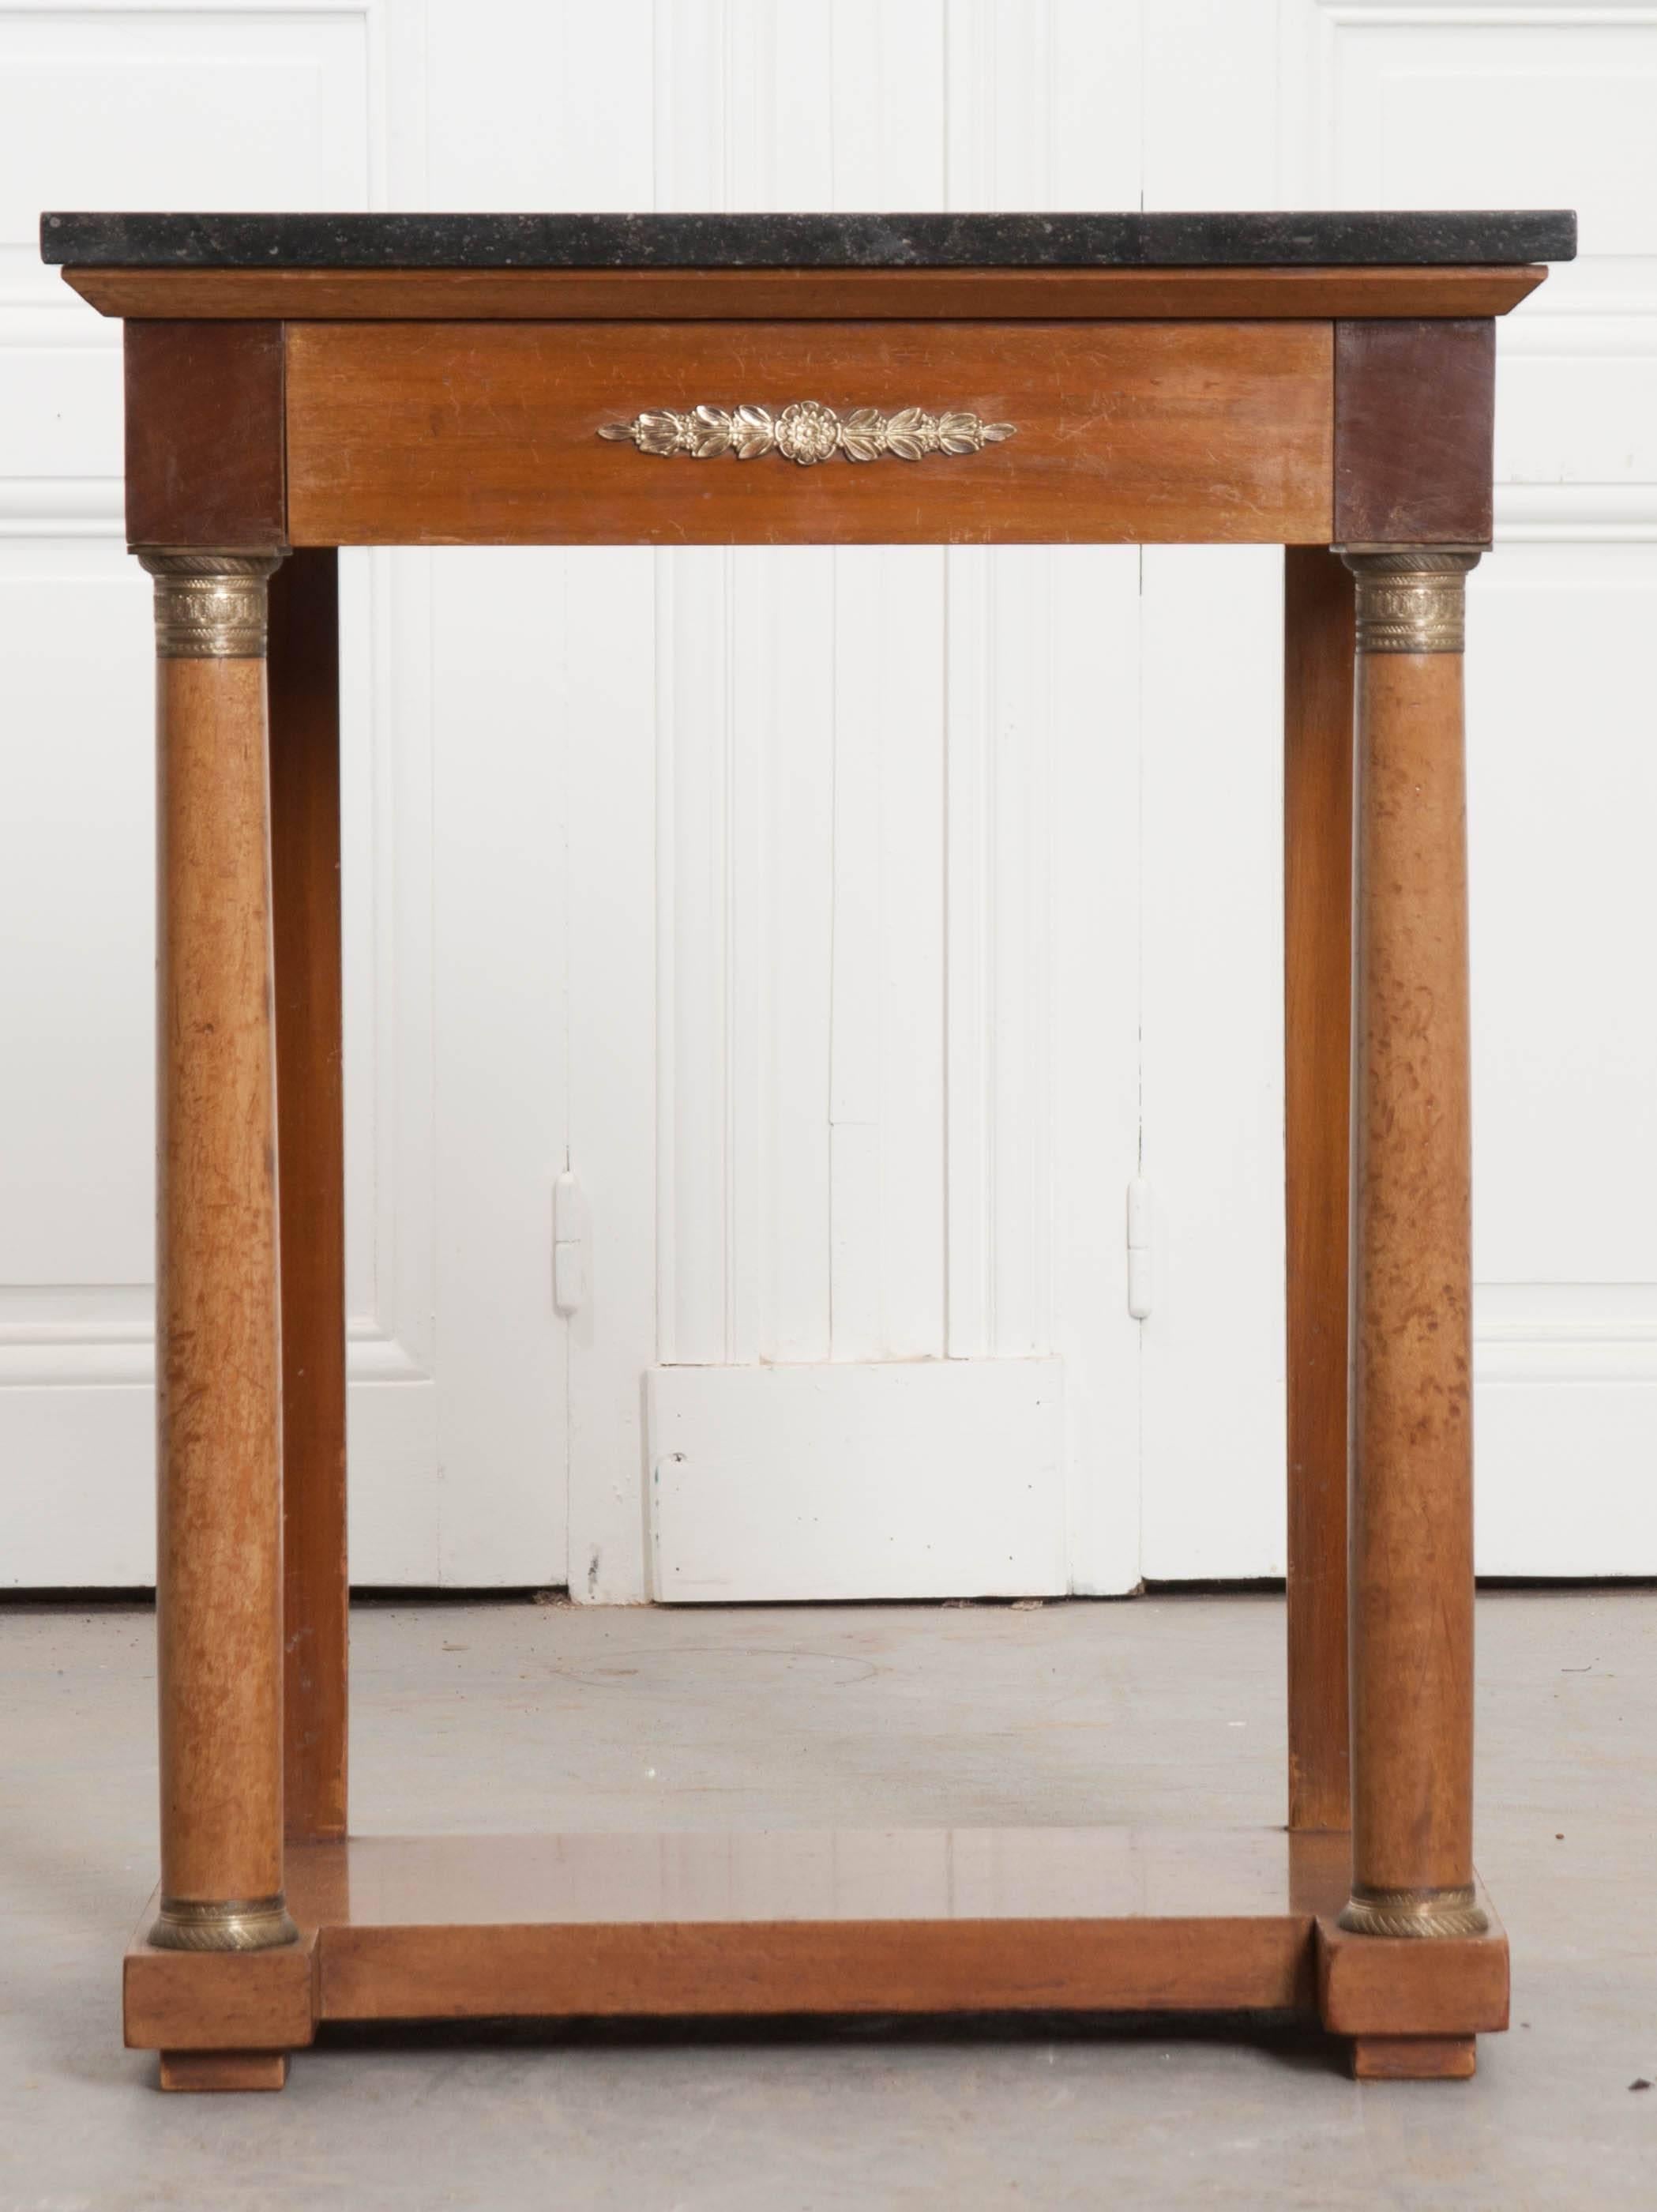 A spectacular marble-top Empire style console, made in France, circa 1920. The console is topped in a fantastic piece of black fossil marble. The apron is outfitted with a single hidden drawer and brass ormolu in a floral and foliate motif. The top